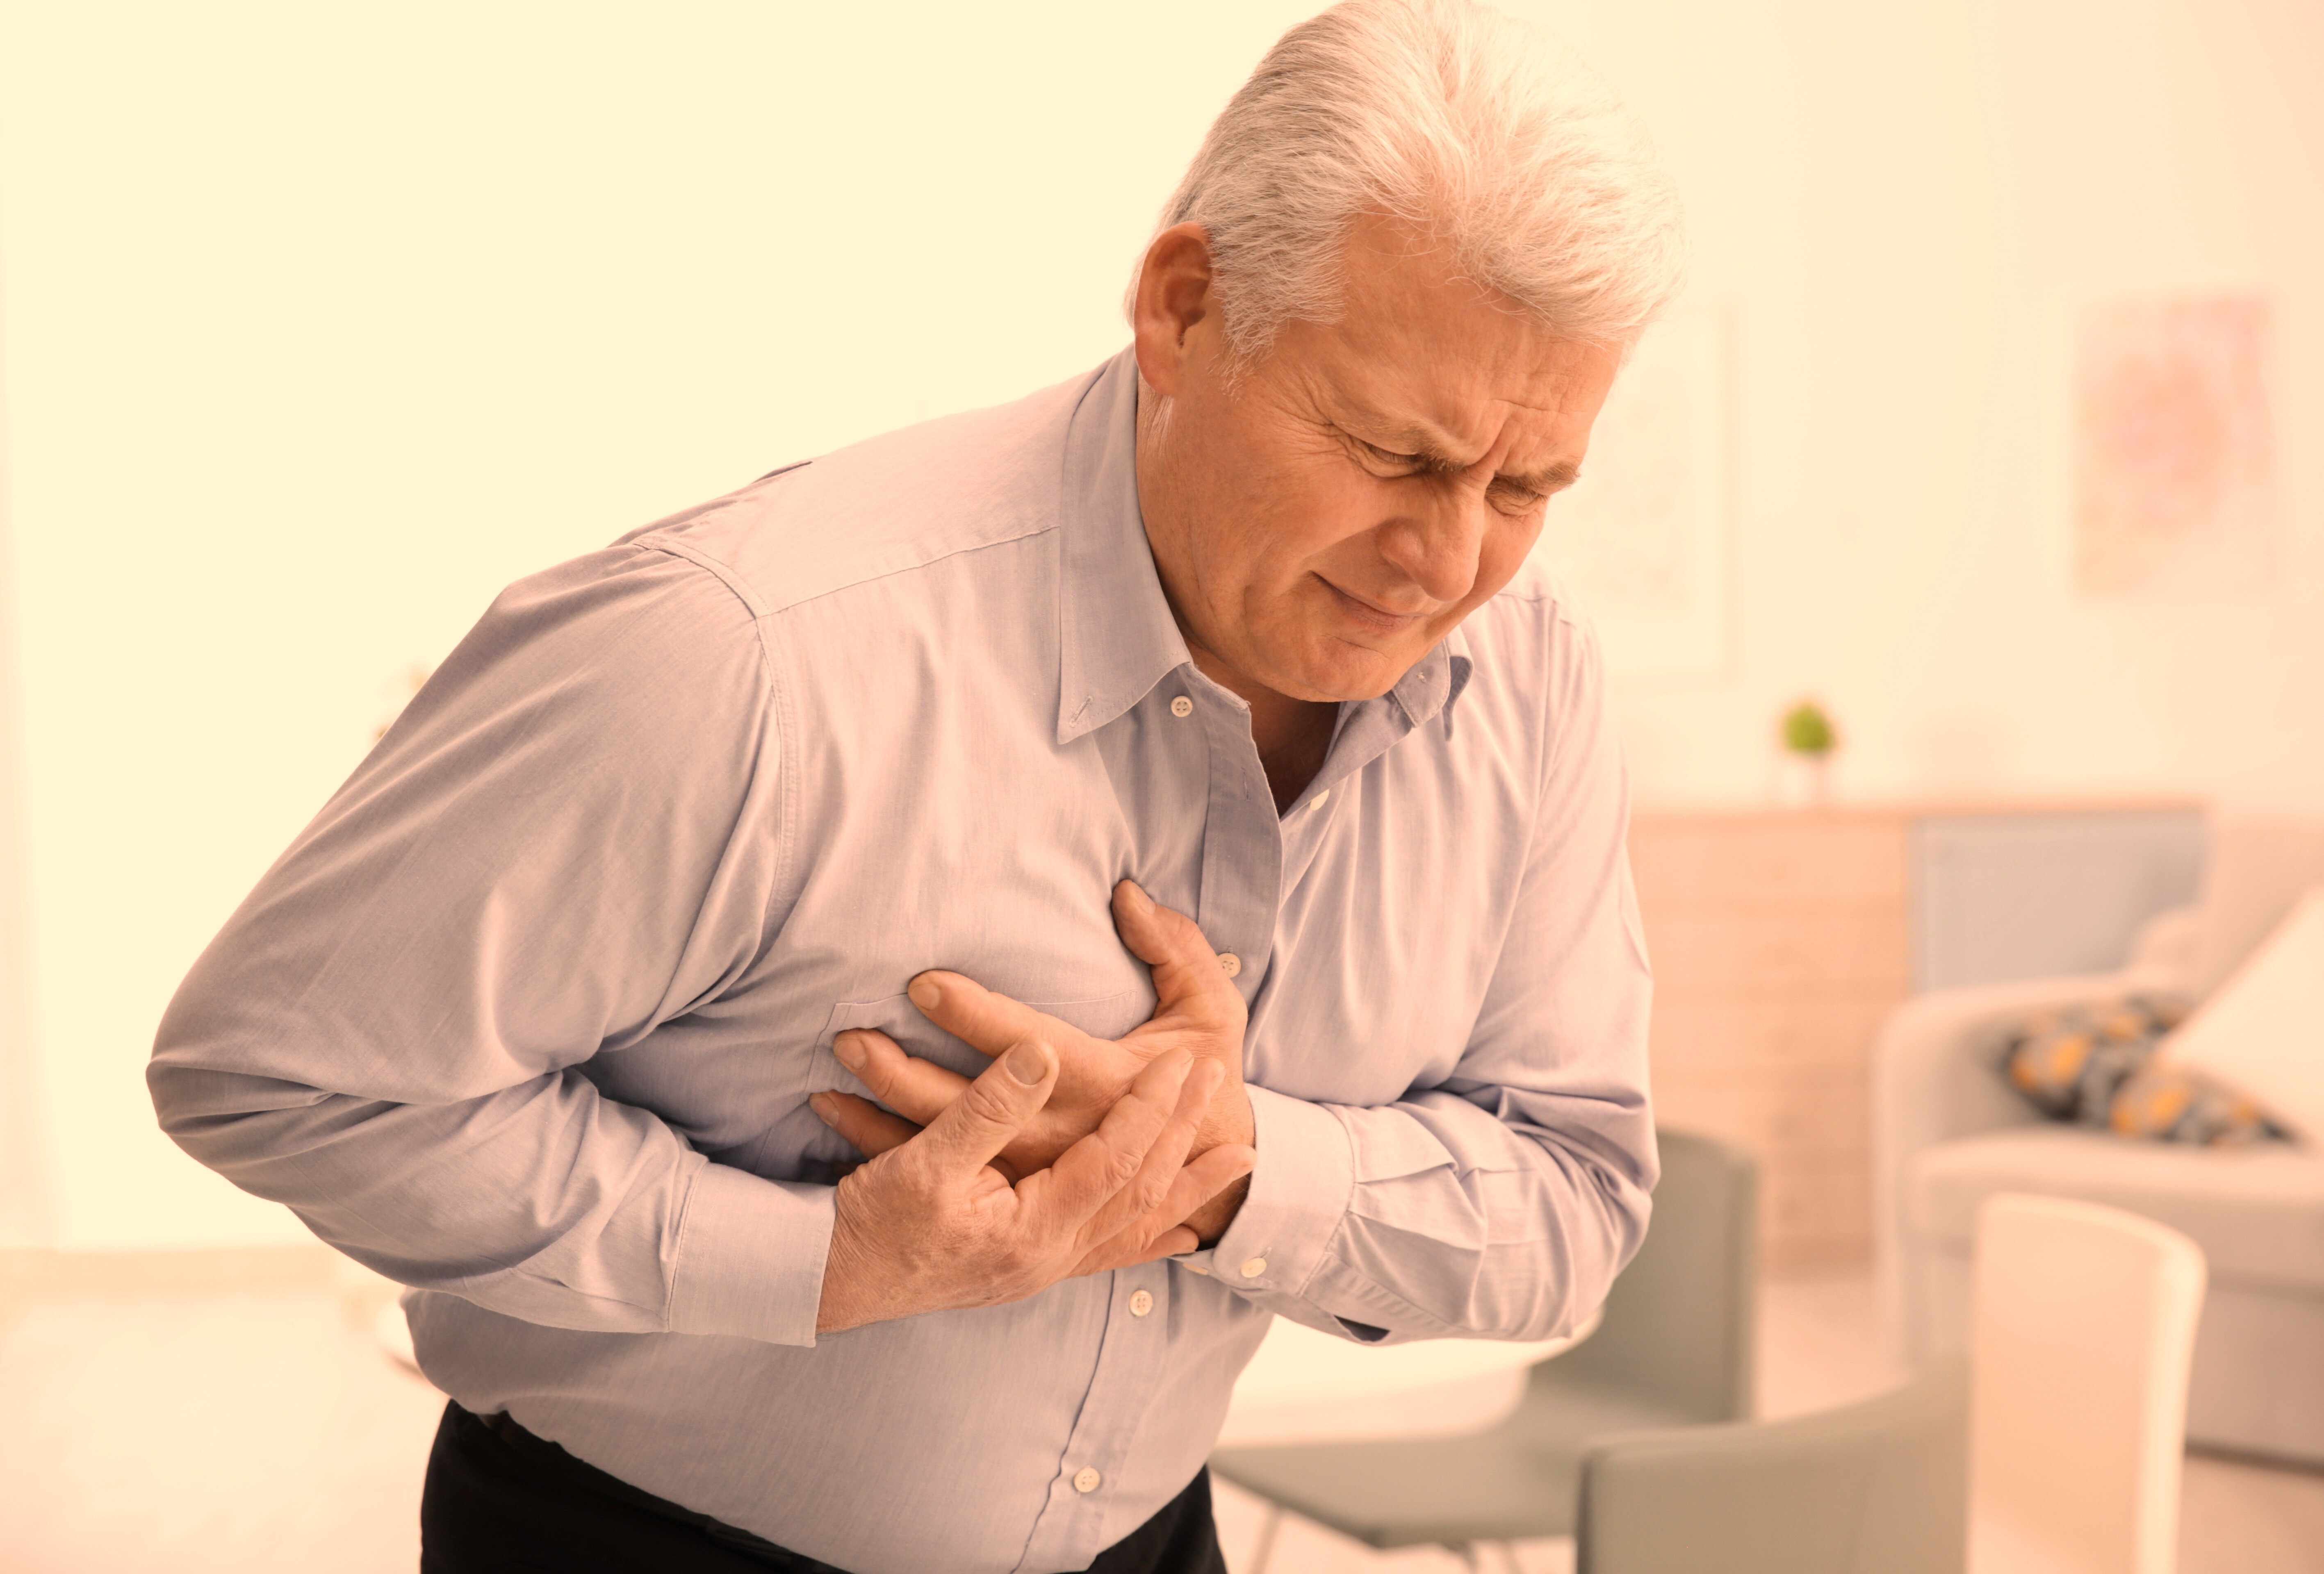 Is Shortness of Breath OR Chest Pain More Likely in Heart Attack?